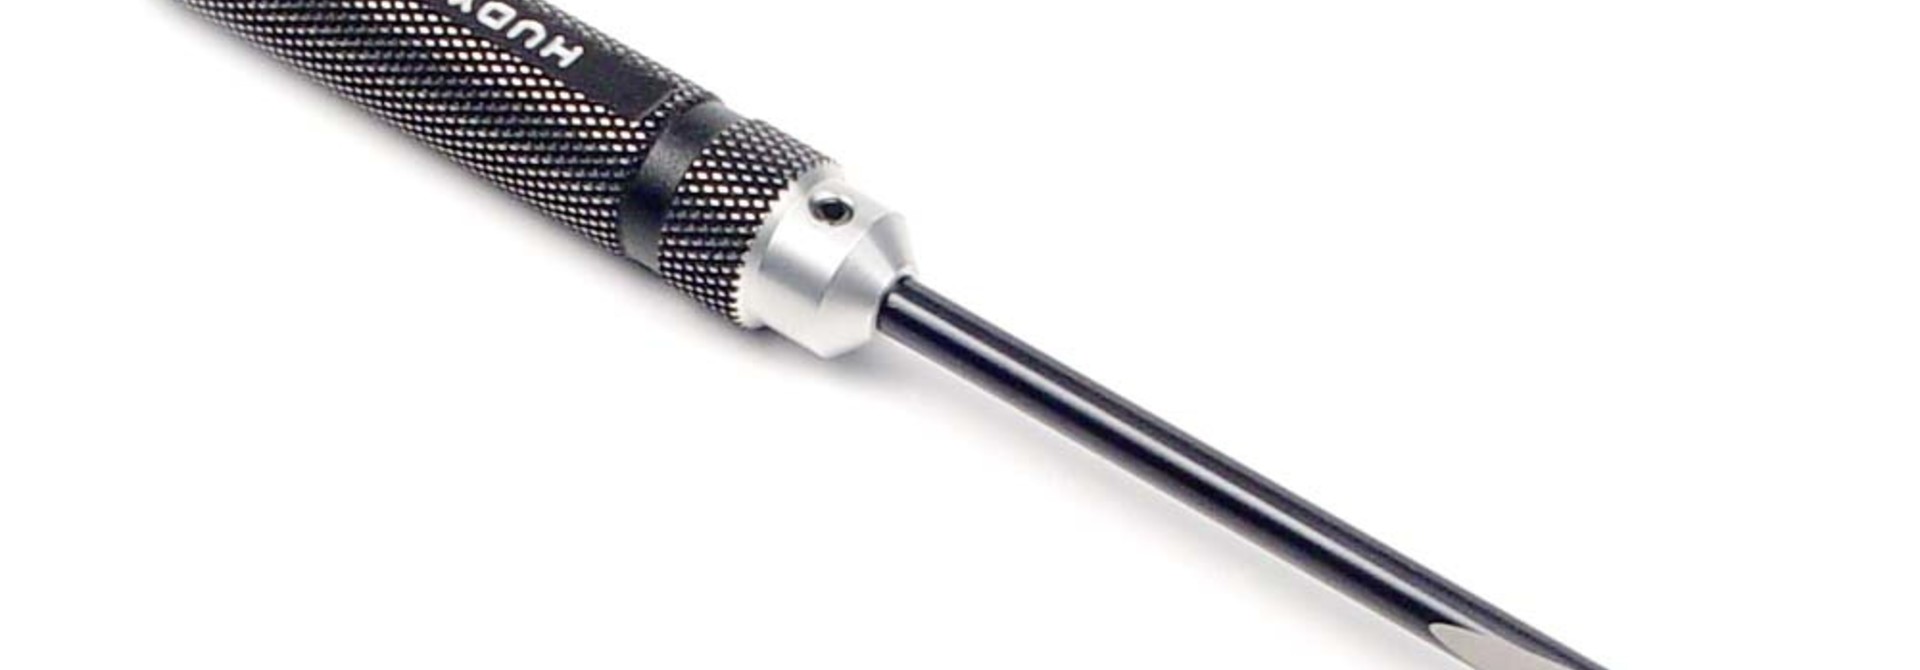 Slotted Screwdriver For Nitro Engine Head. H155830